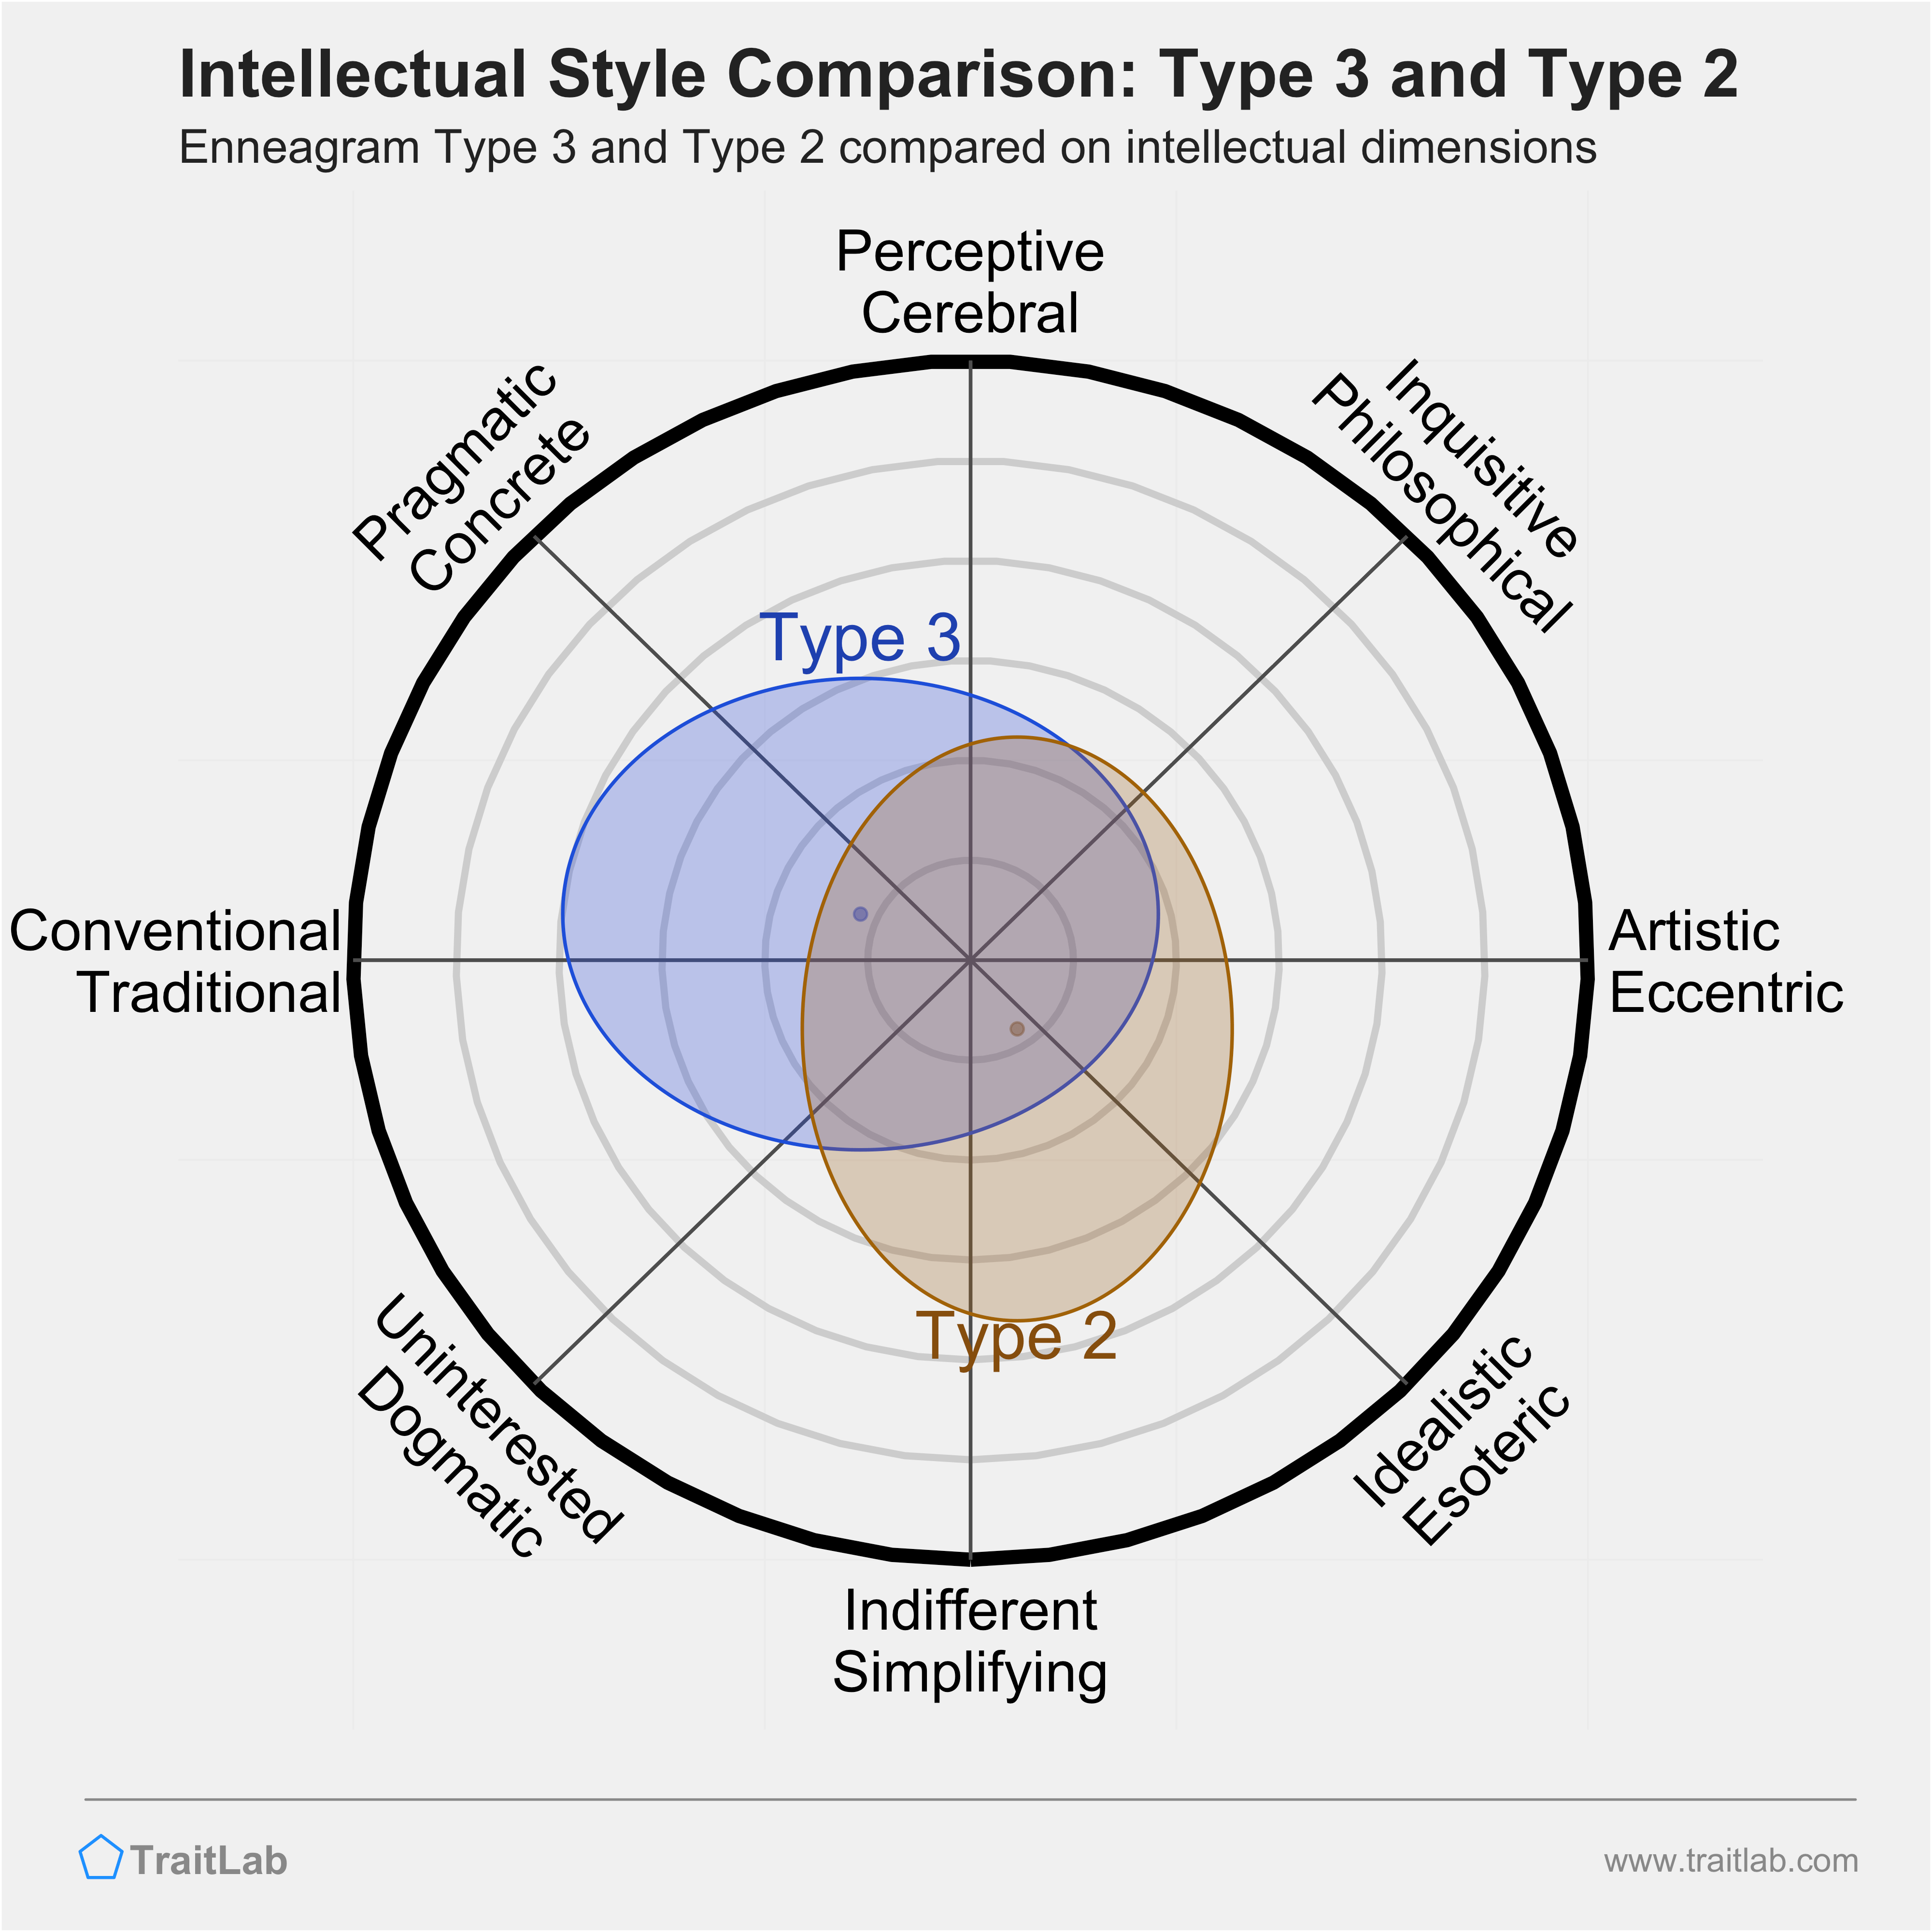 Type 3 and Type 2 comparison across intellectual dimensions